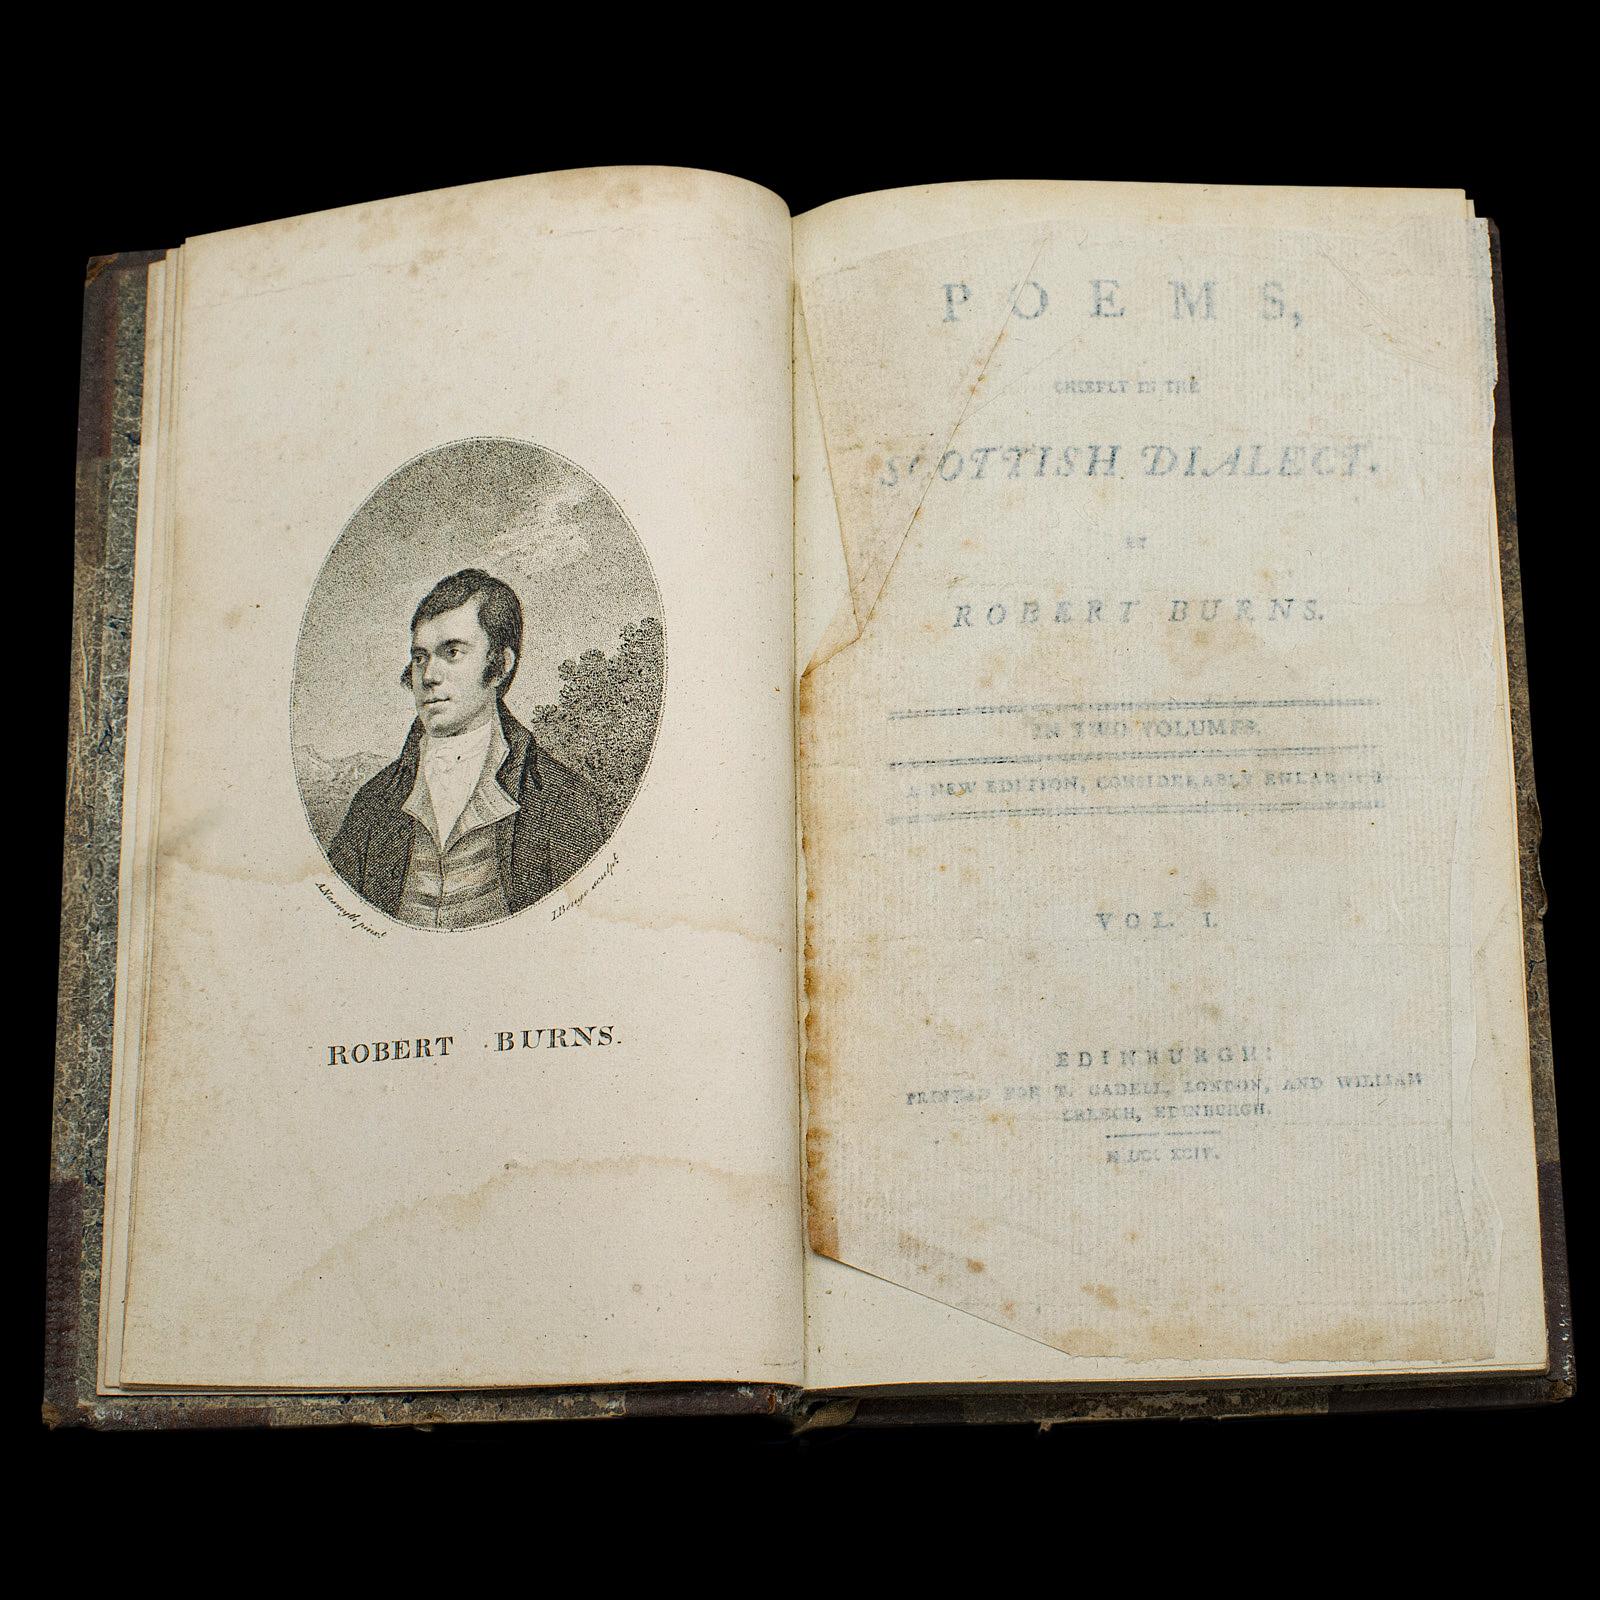 Paper Book of Antique Poems by Robert Burns, Scottish Dialect English, Georgian, 1813